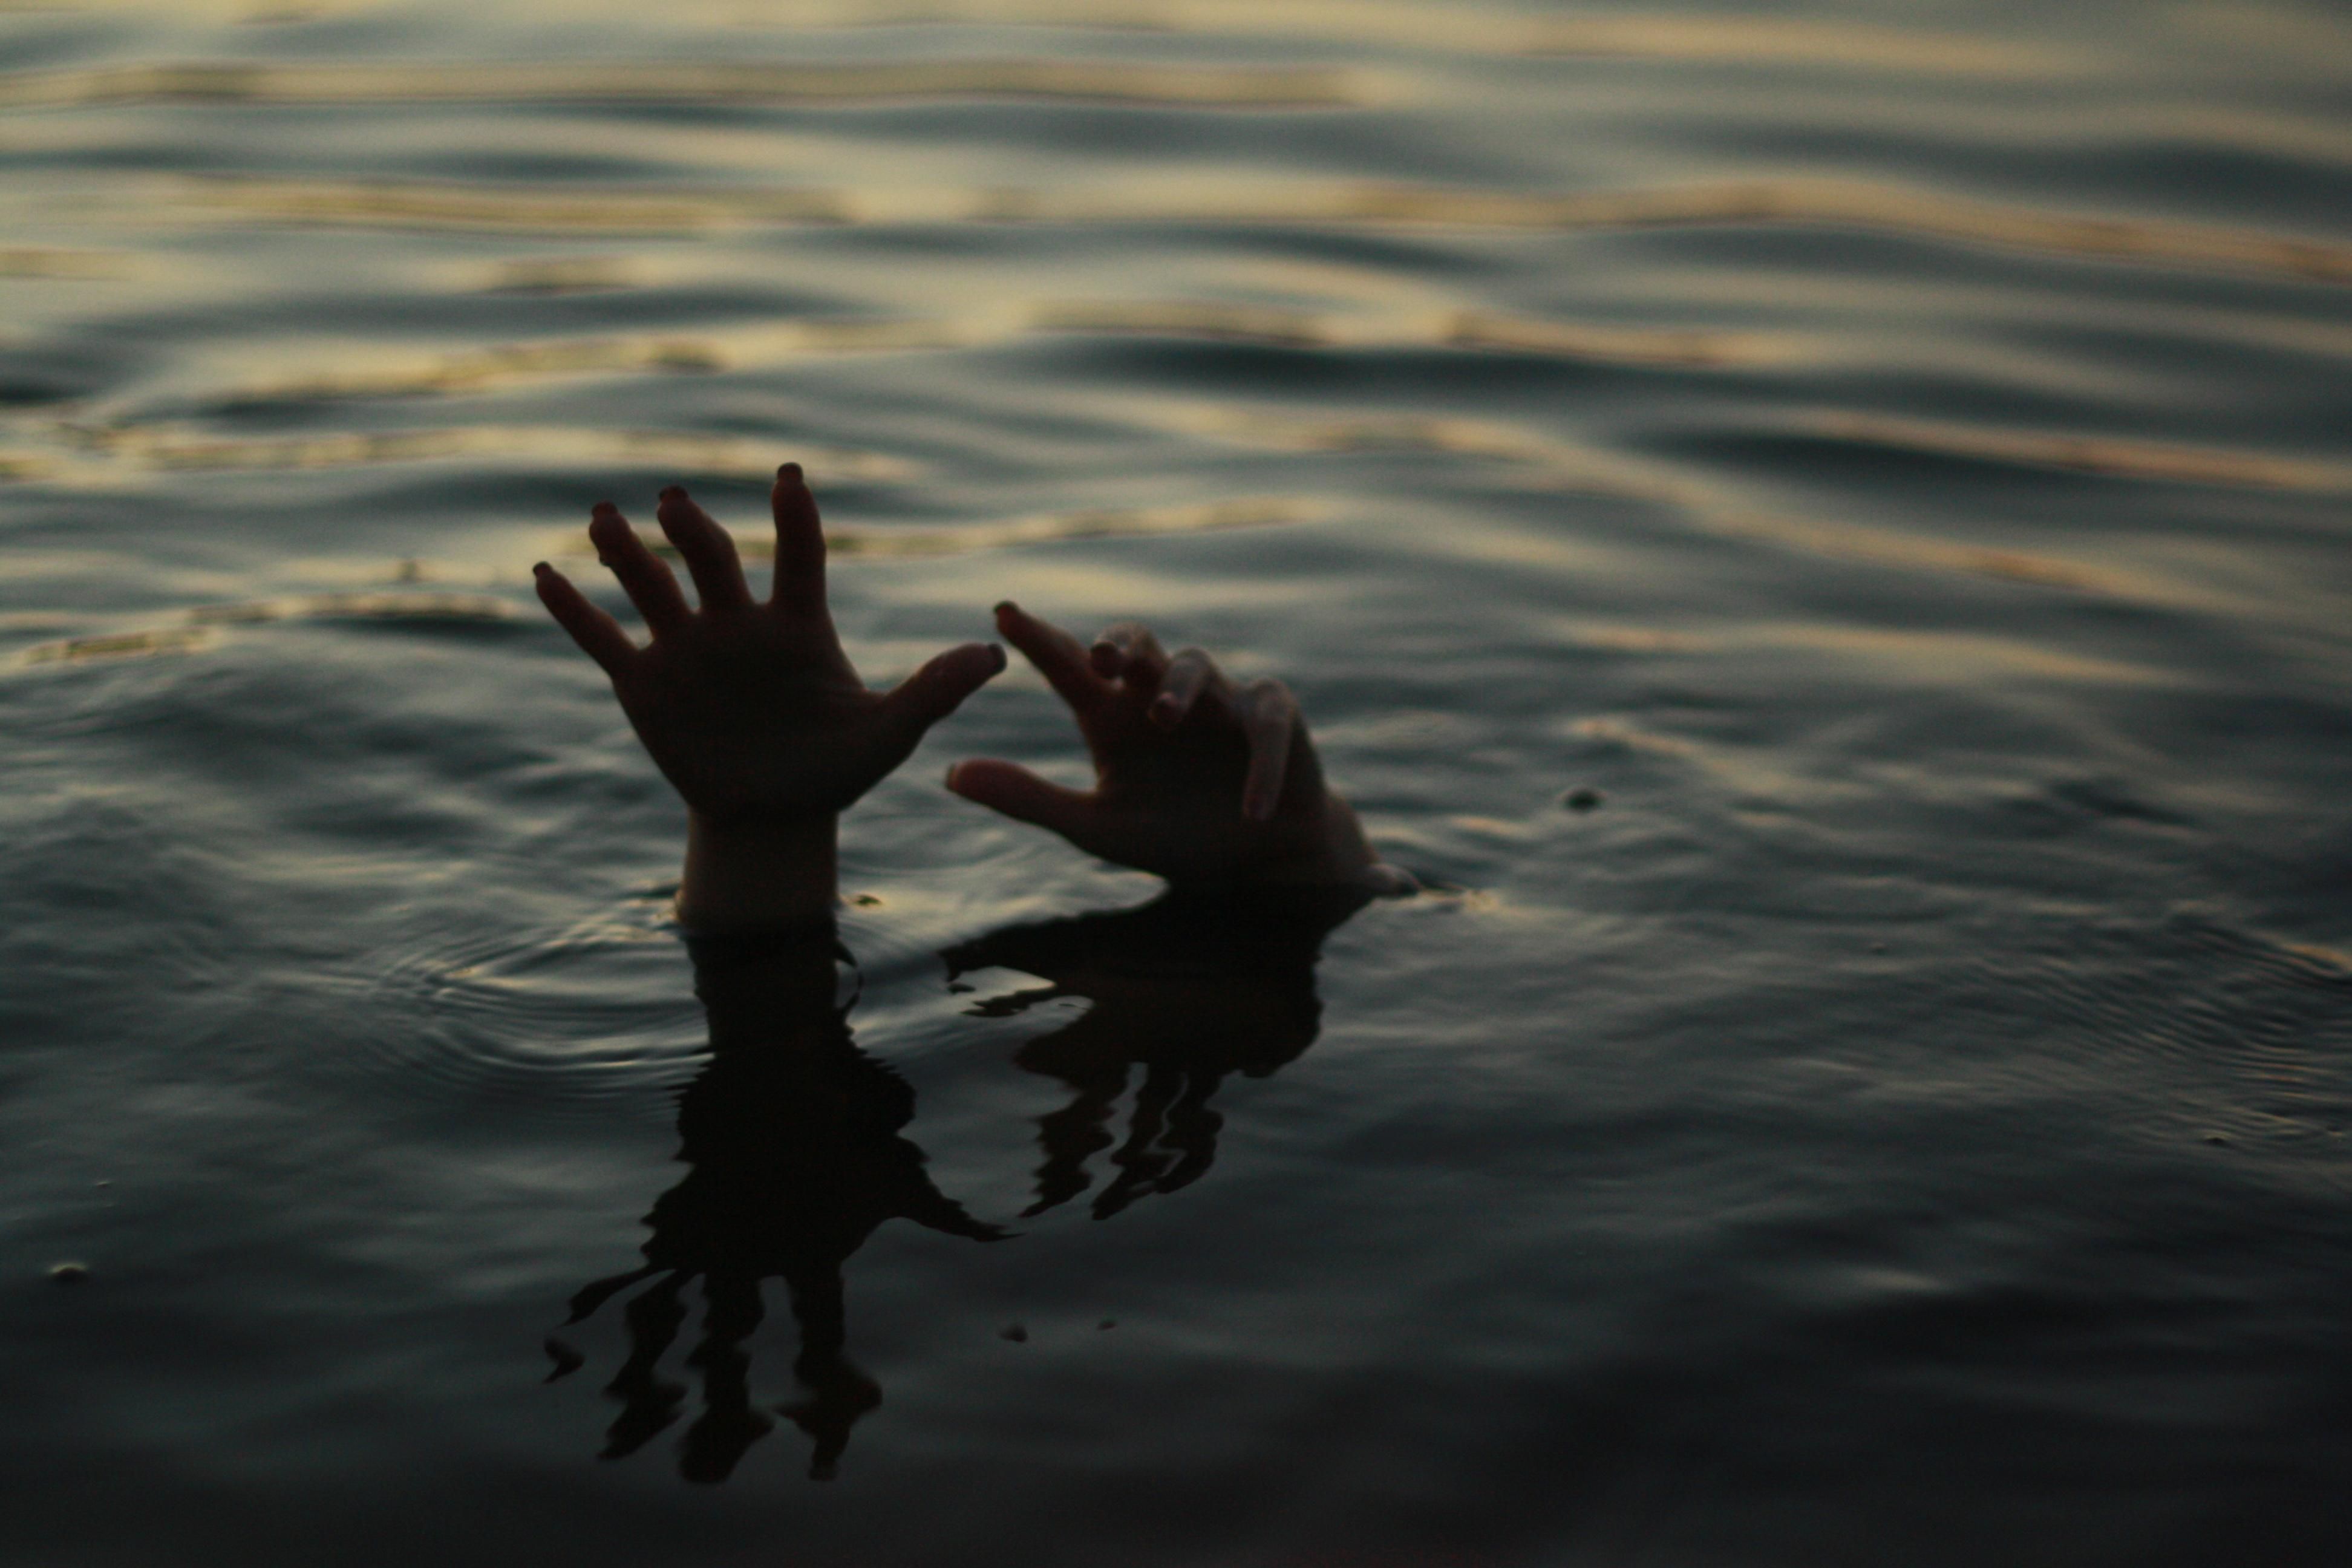 Drowning Background. Drowning Pool Wallpaper, Drowning Wallpaper and People Drowning Wallpaper